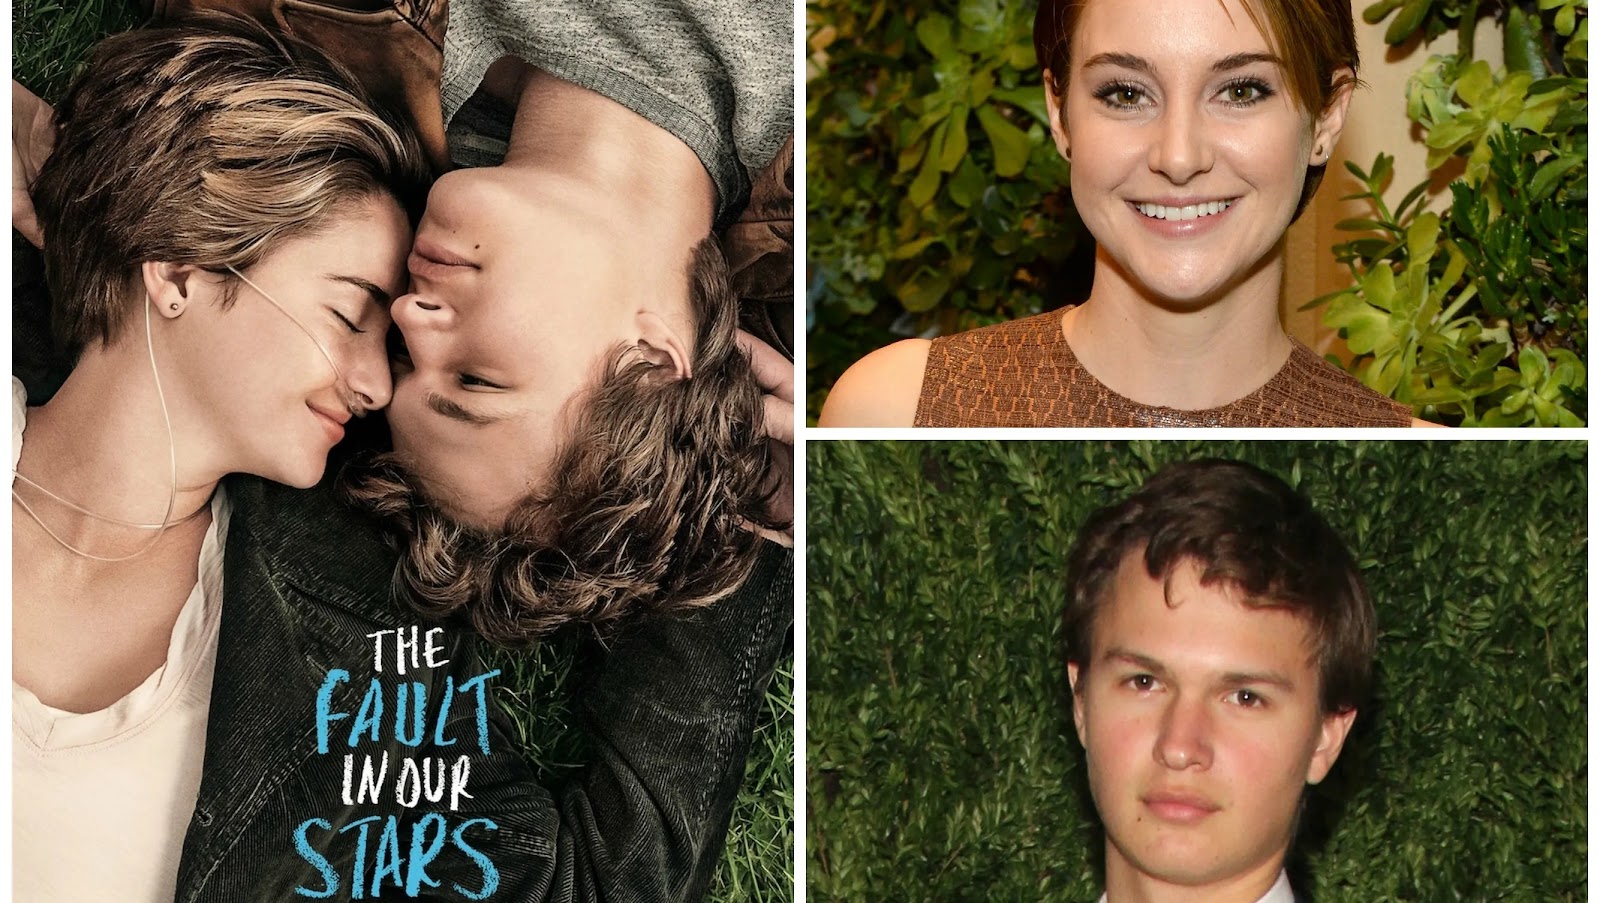 The story of The Fault in Our Stars follows two teenagers, Hazel Grace Lancaster (Shailene Woodley) and Augustus Waters (Ansel Elgort).